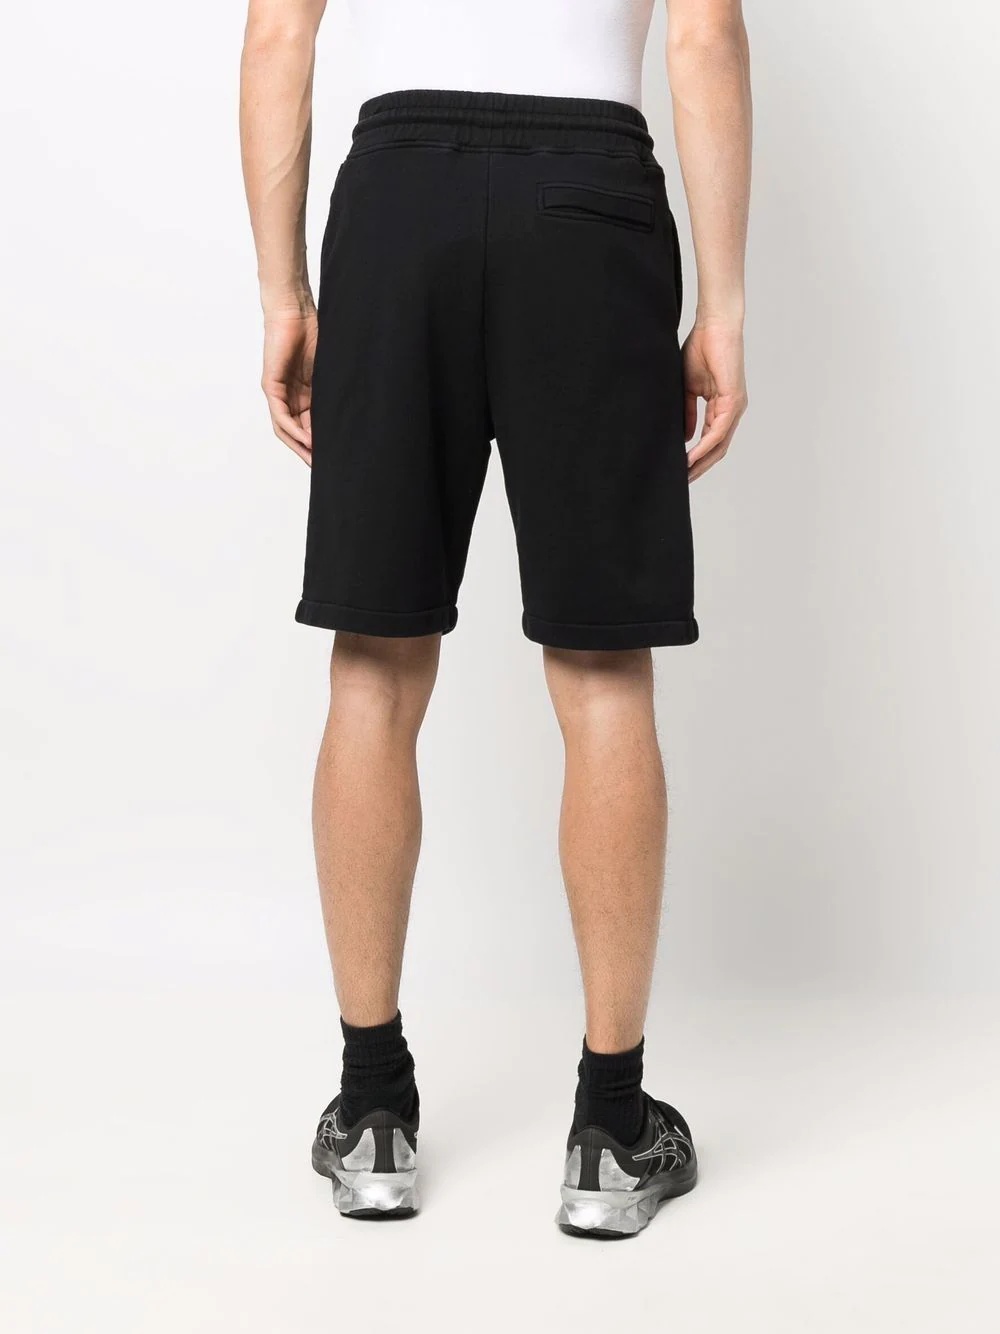 embroidered-motif track shorts - 4